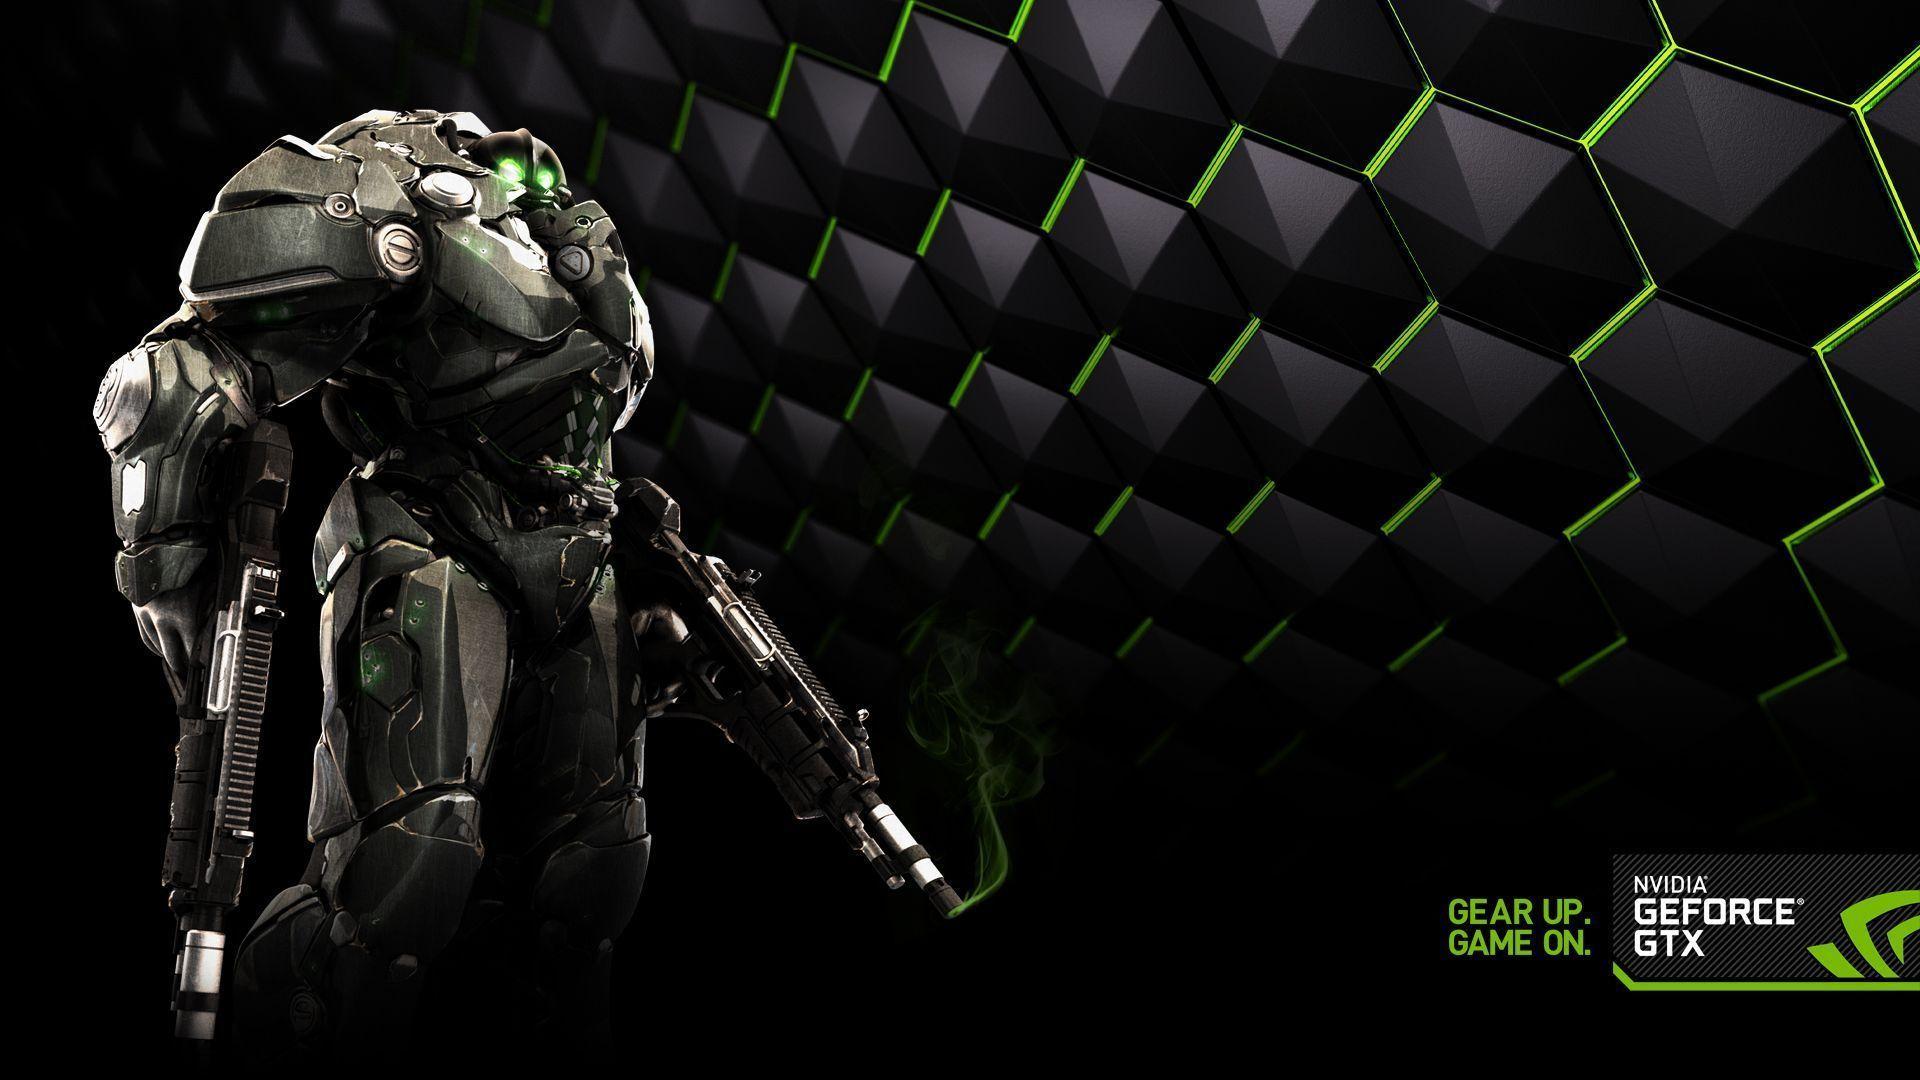 Download Gear up. Game on. Wallpapers